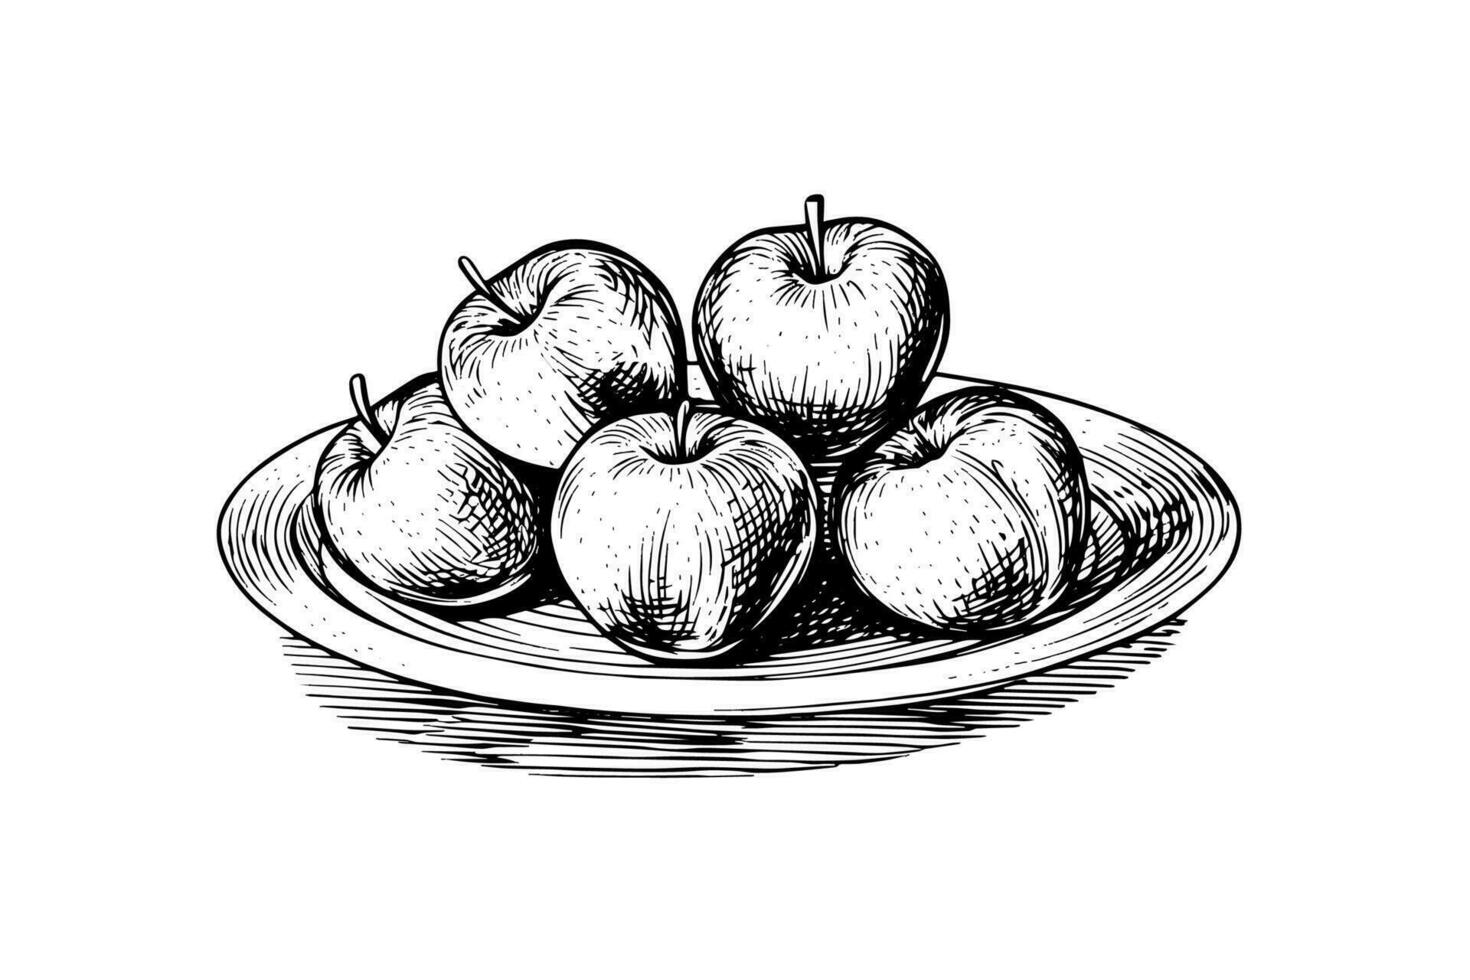 Apple fruit on plate hand drawn engraving style vector illustrations.